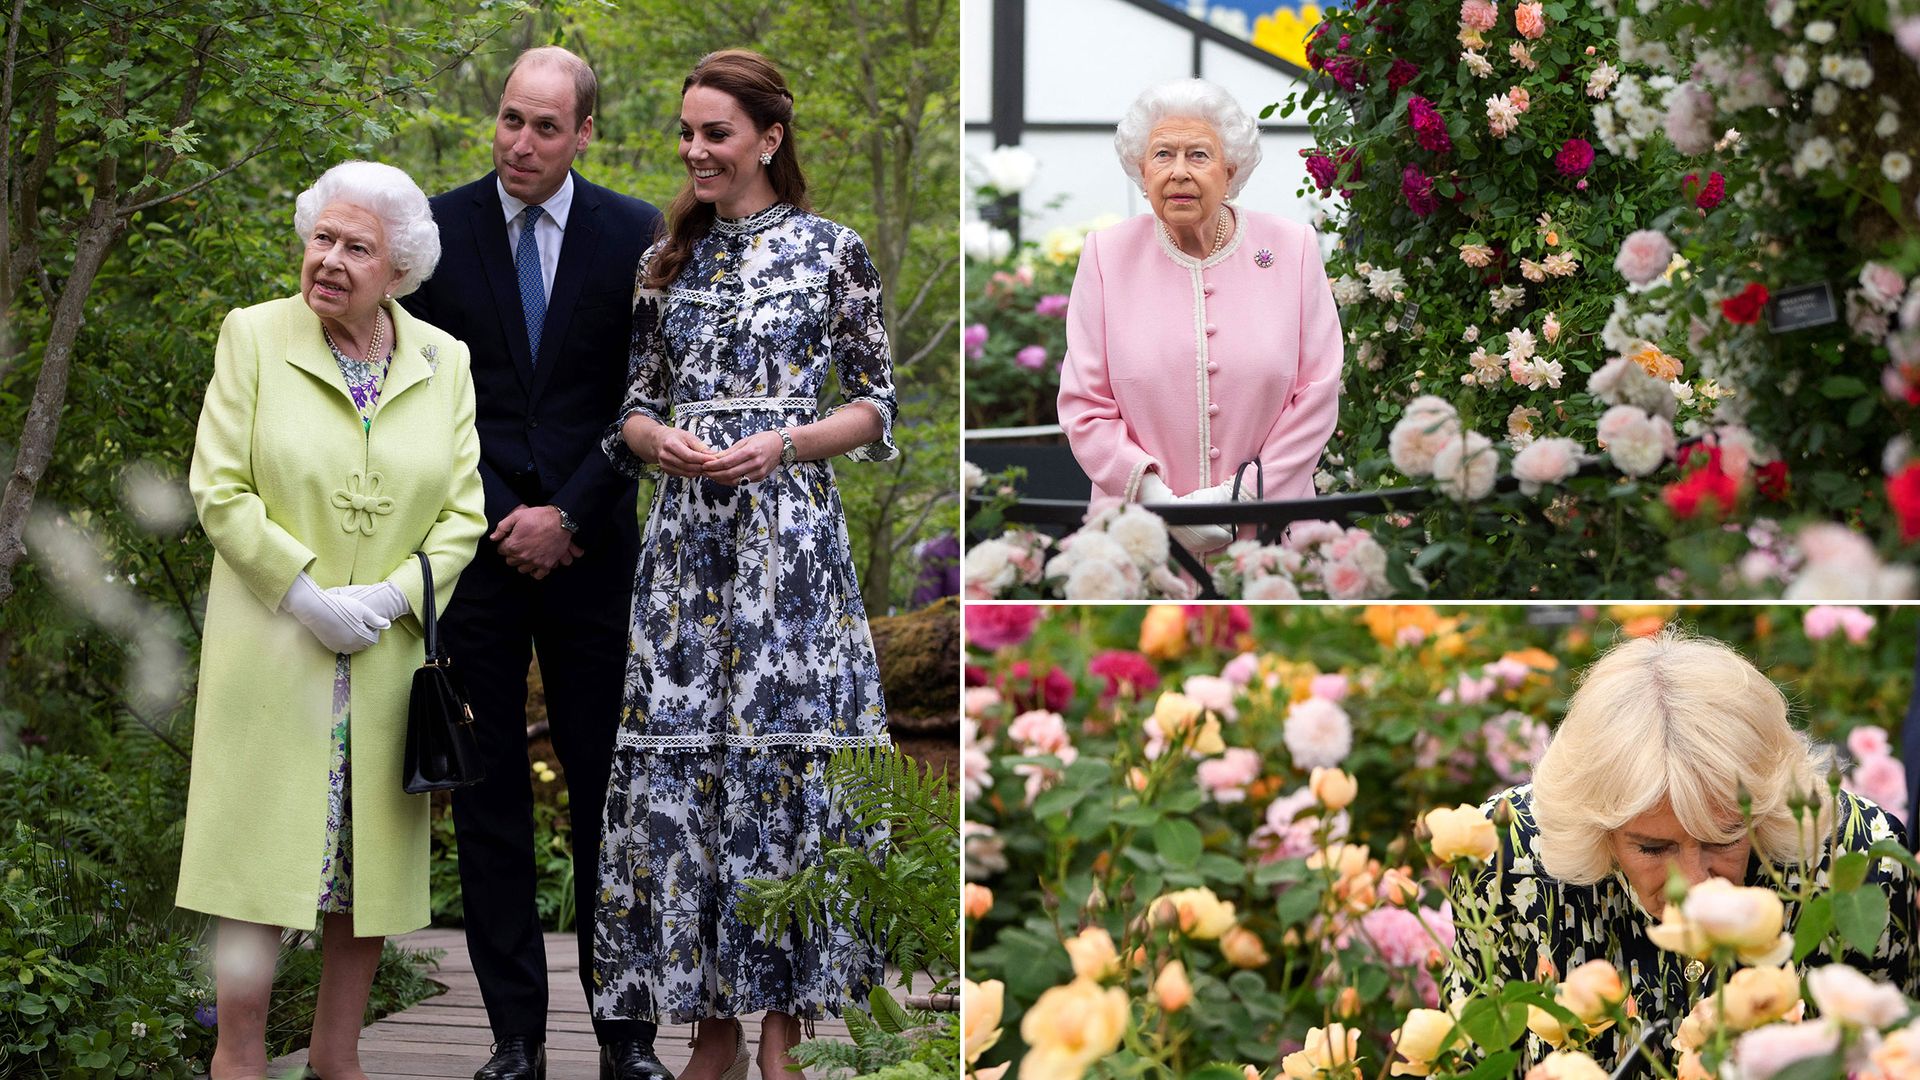 Royals at Chelsea Flower Show